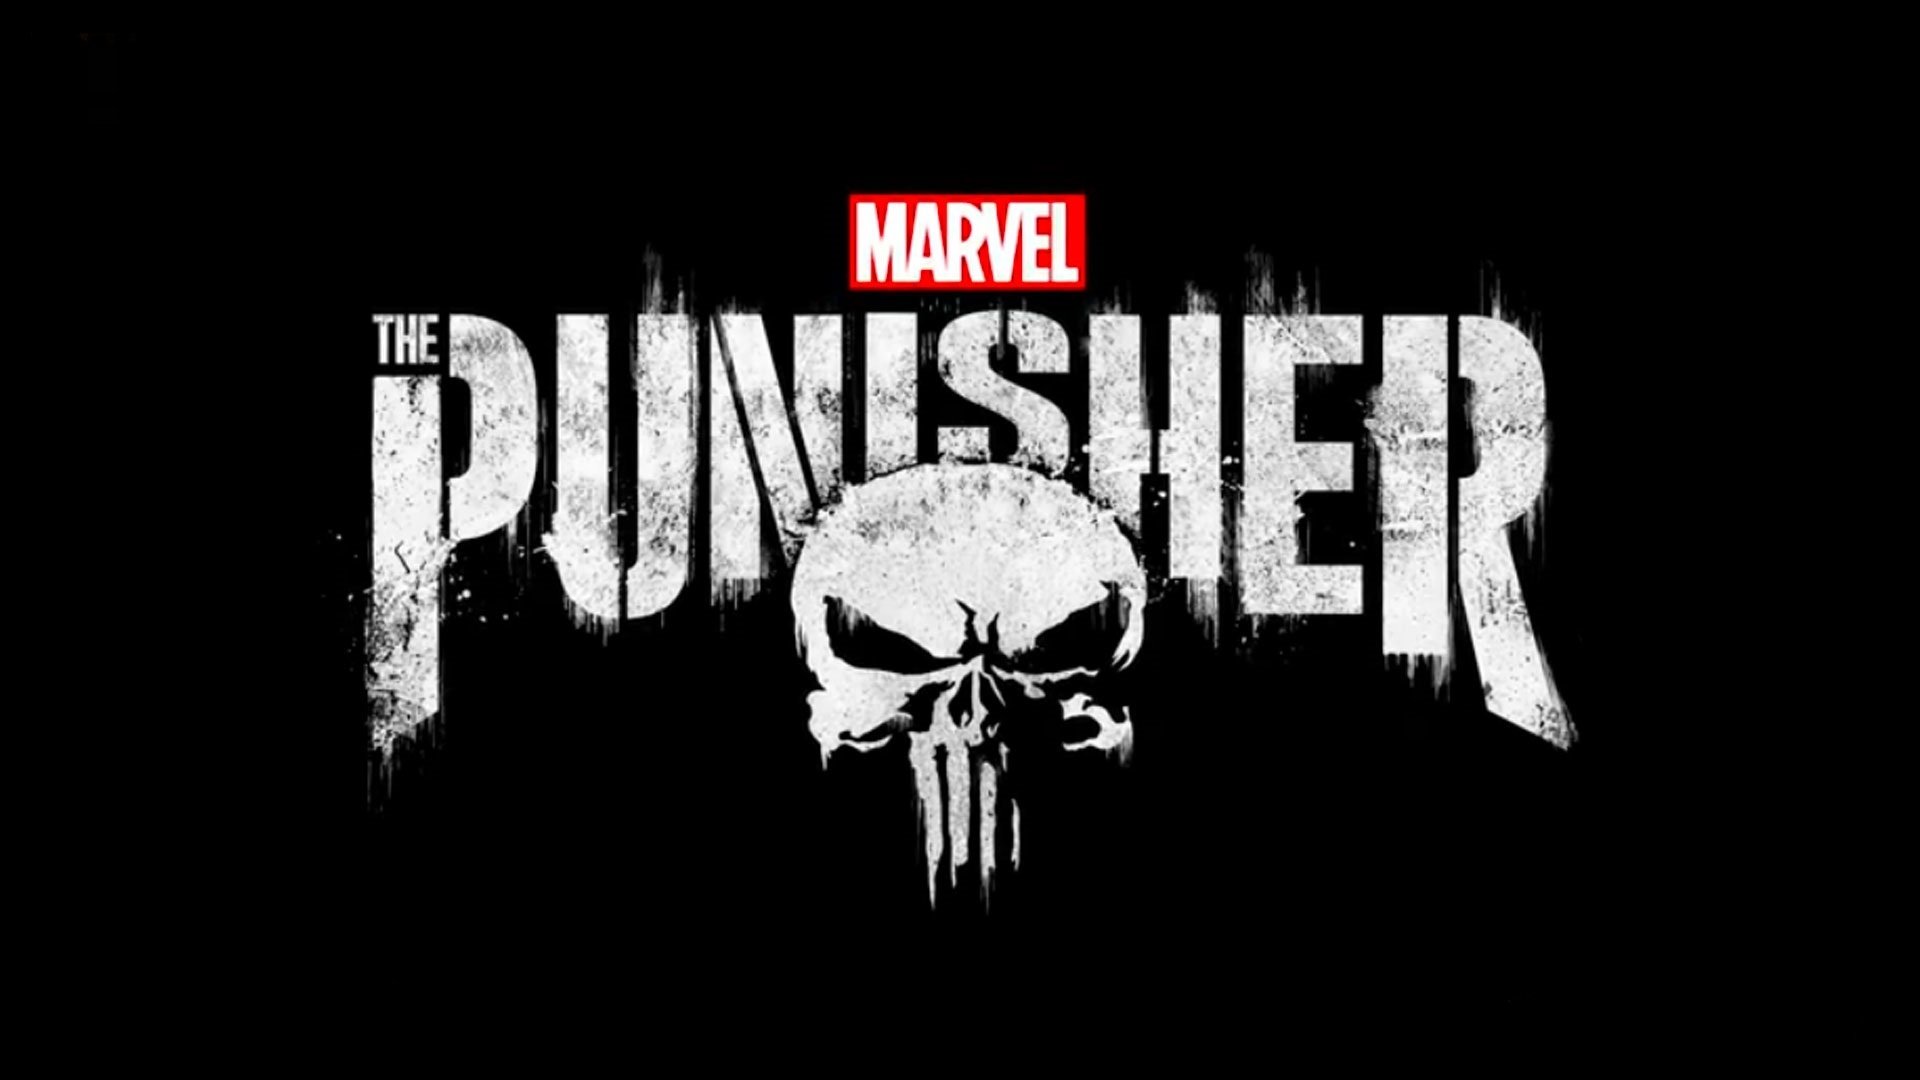 The Punisher HD Wallpaper Background Image